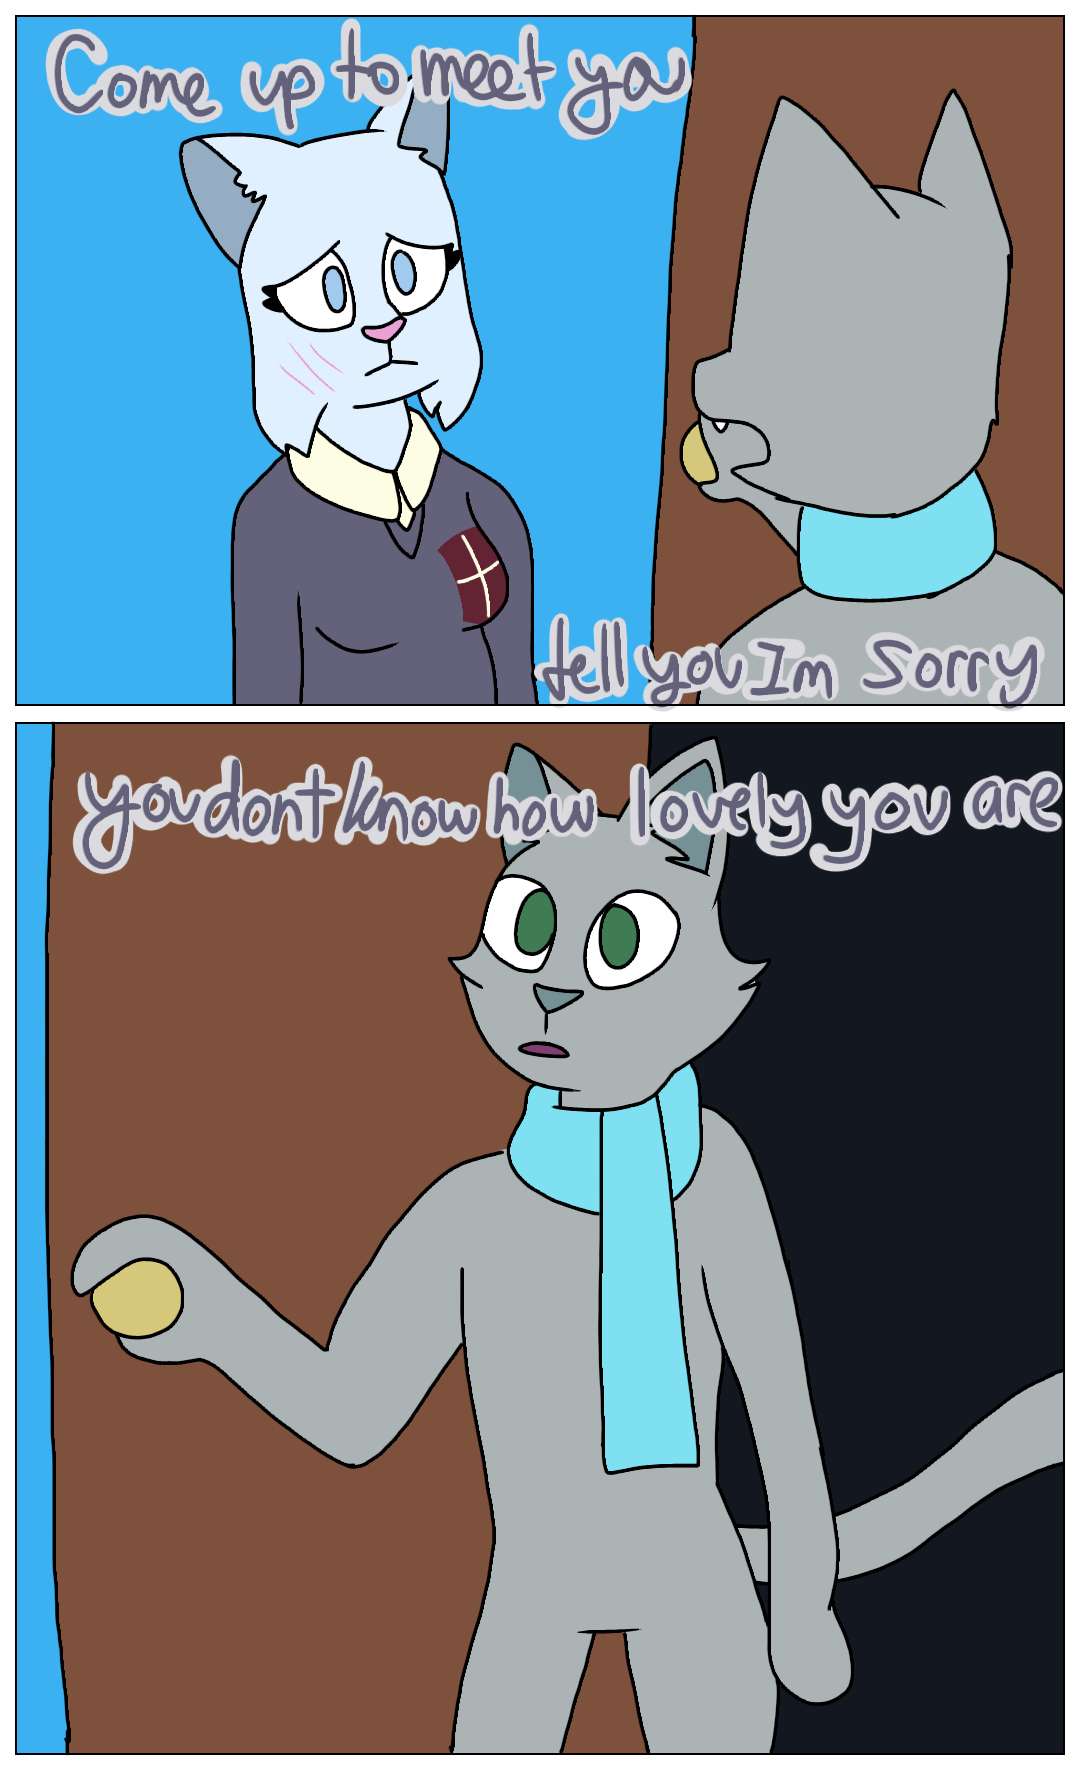 Candybooru image #12578, tagged with Dovewing_(Artist) Lucy Mike comic